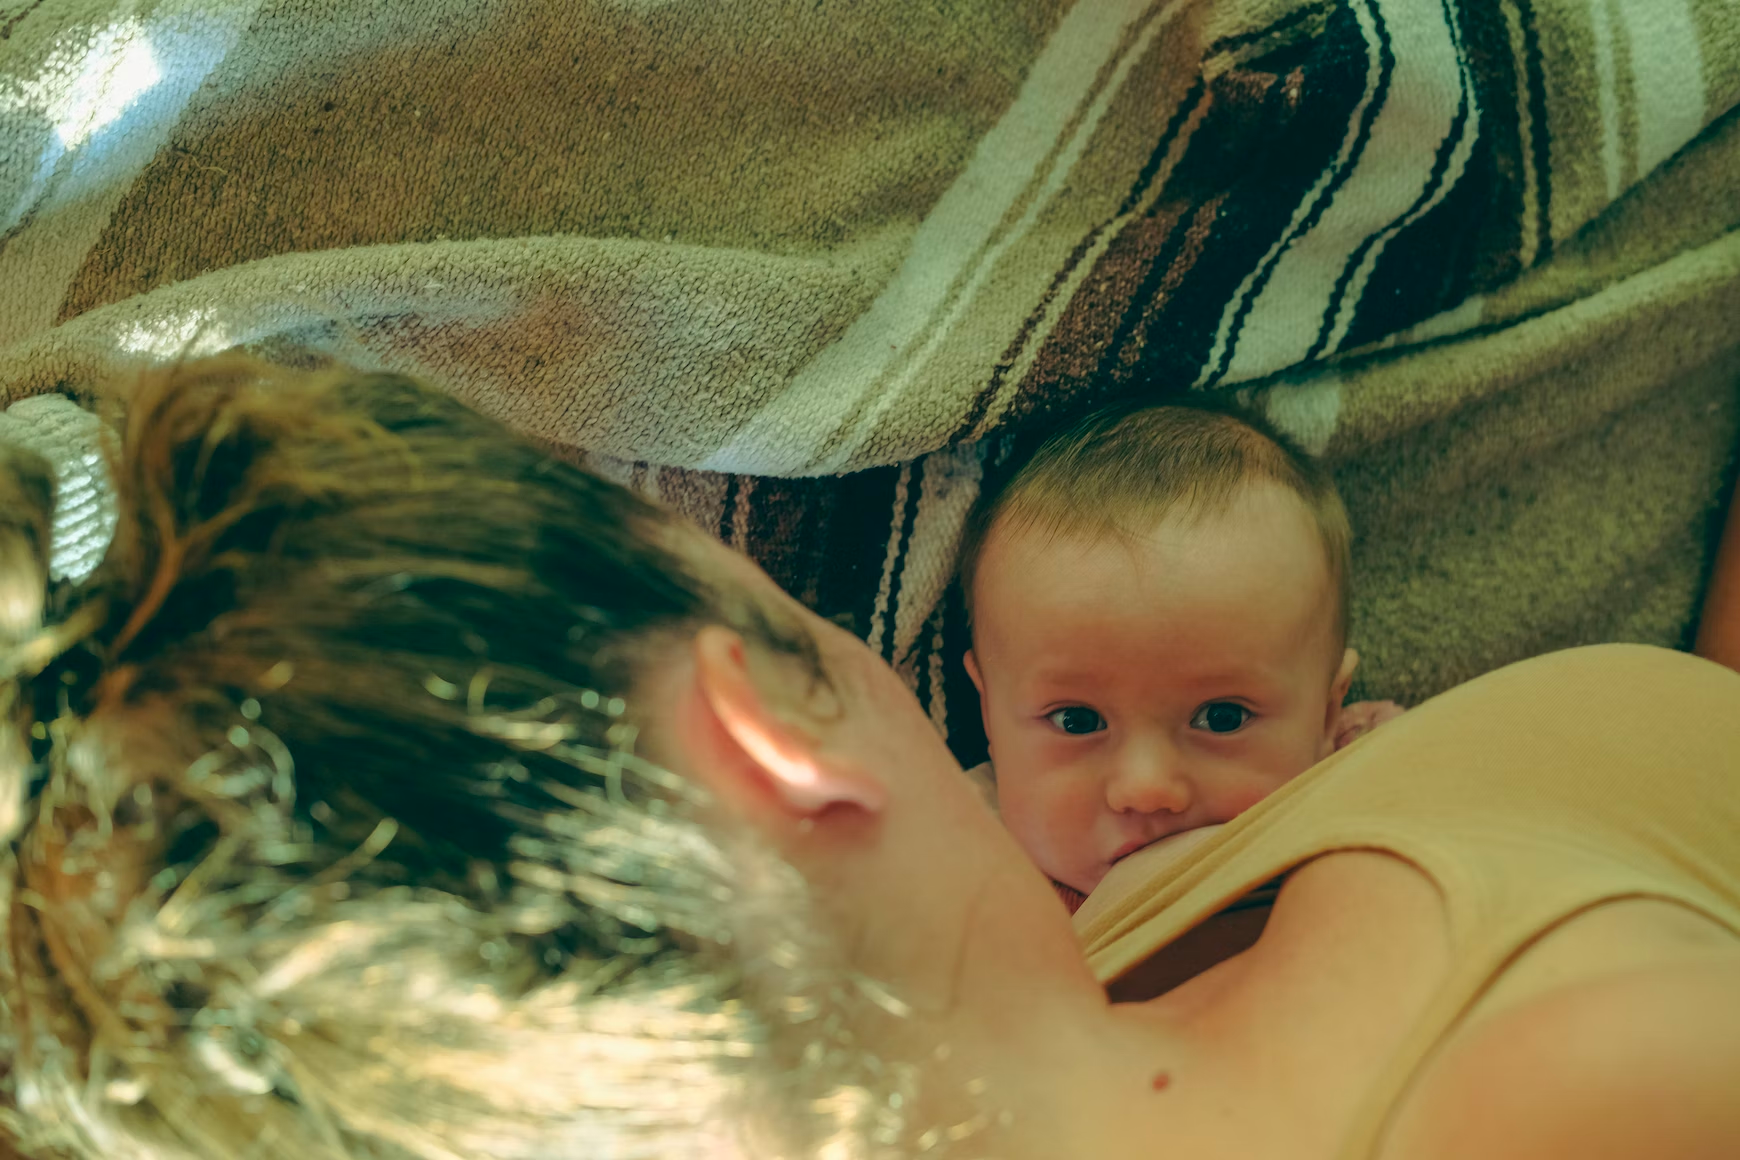 Common breastfeeding myths and misconceptions